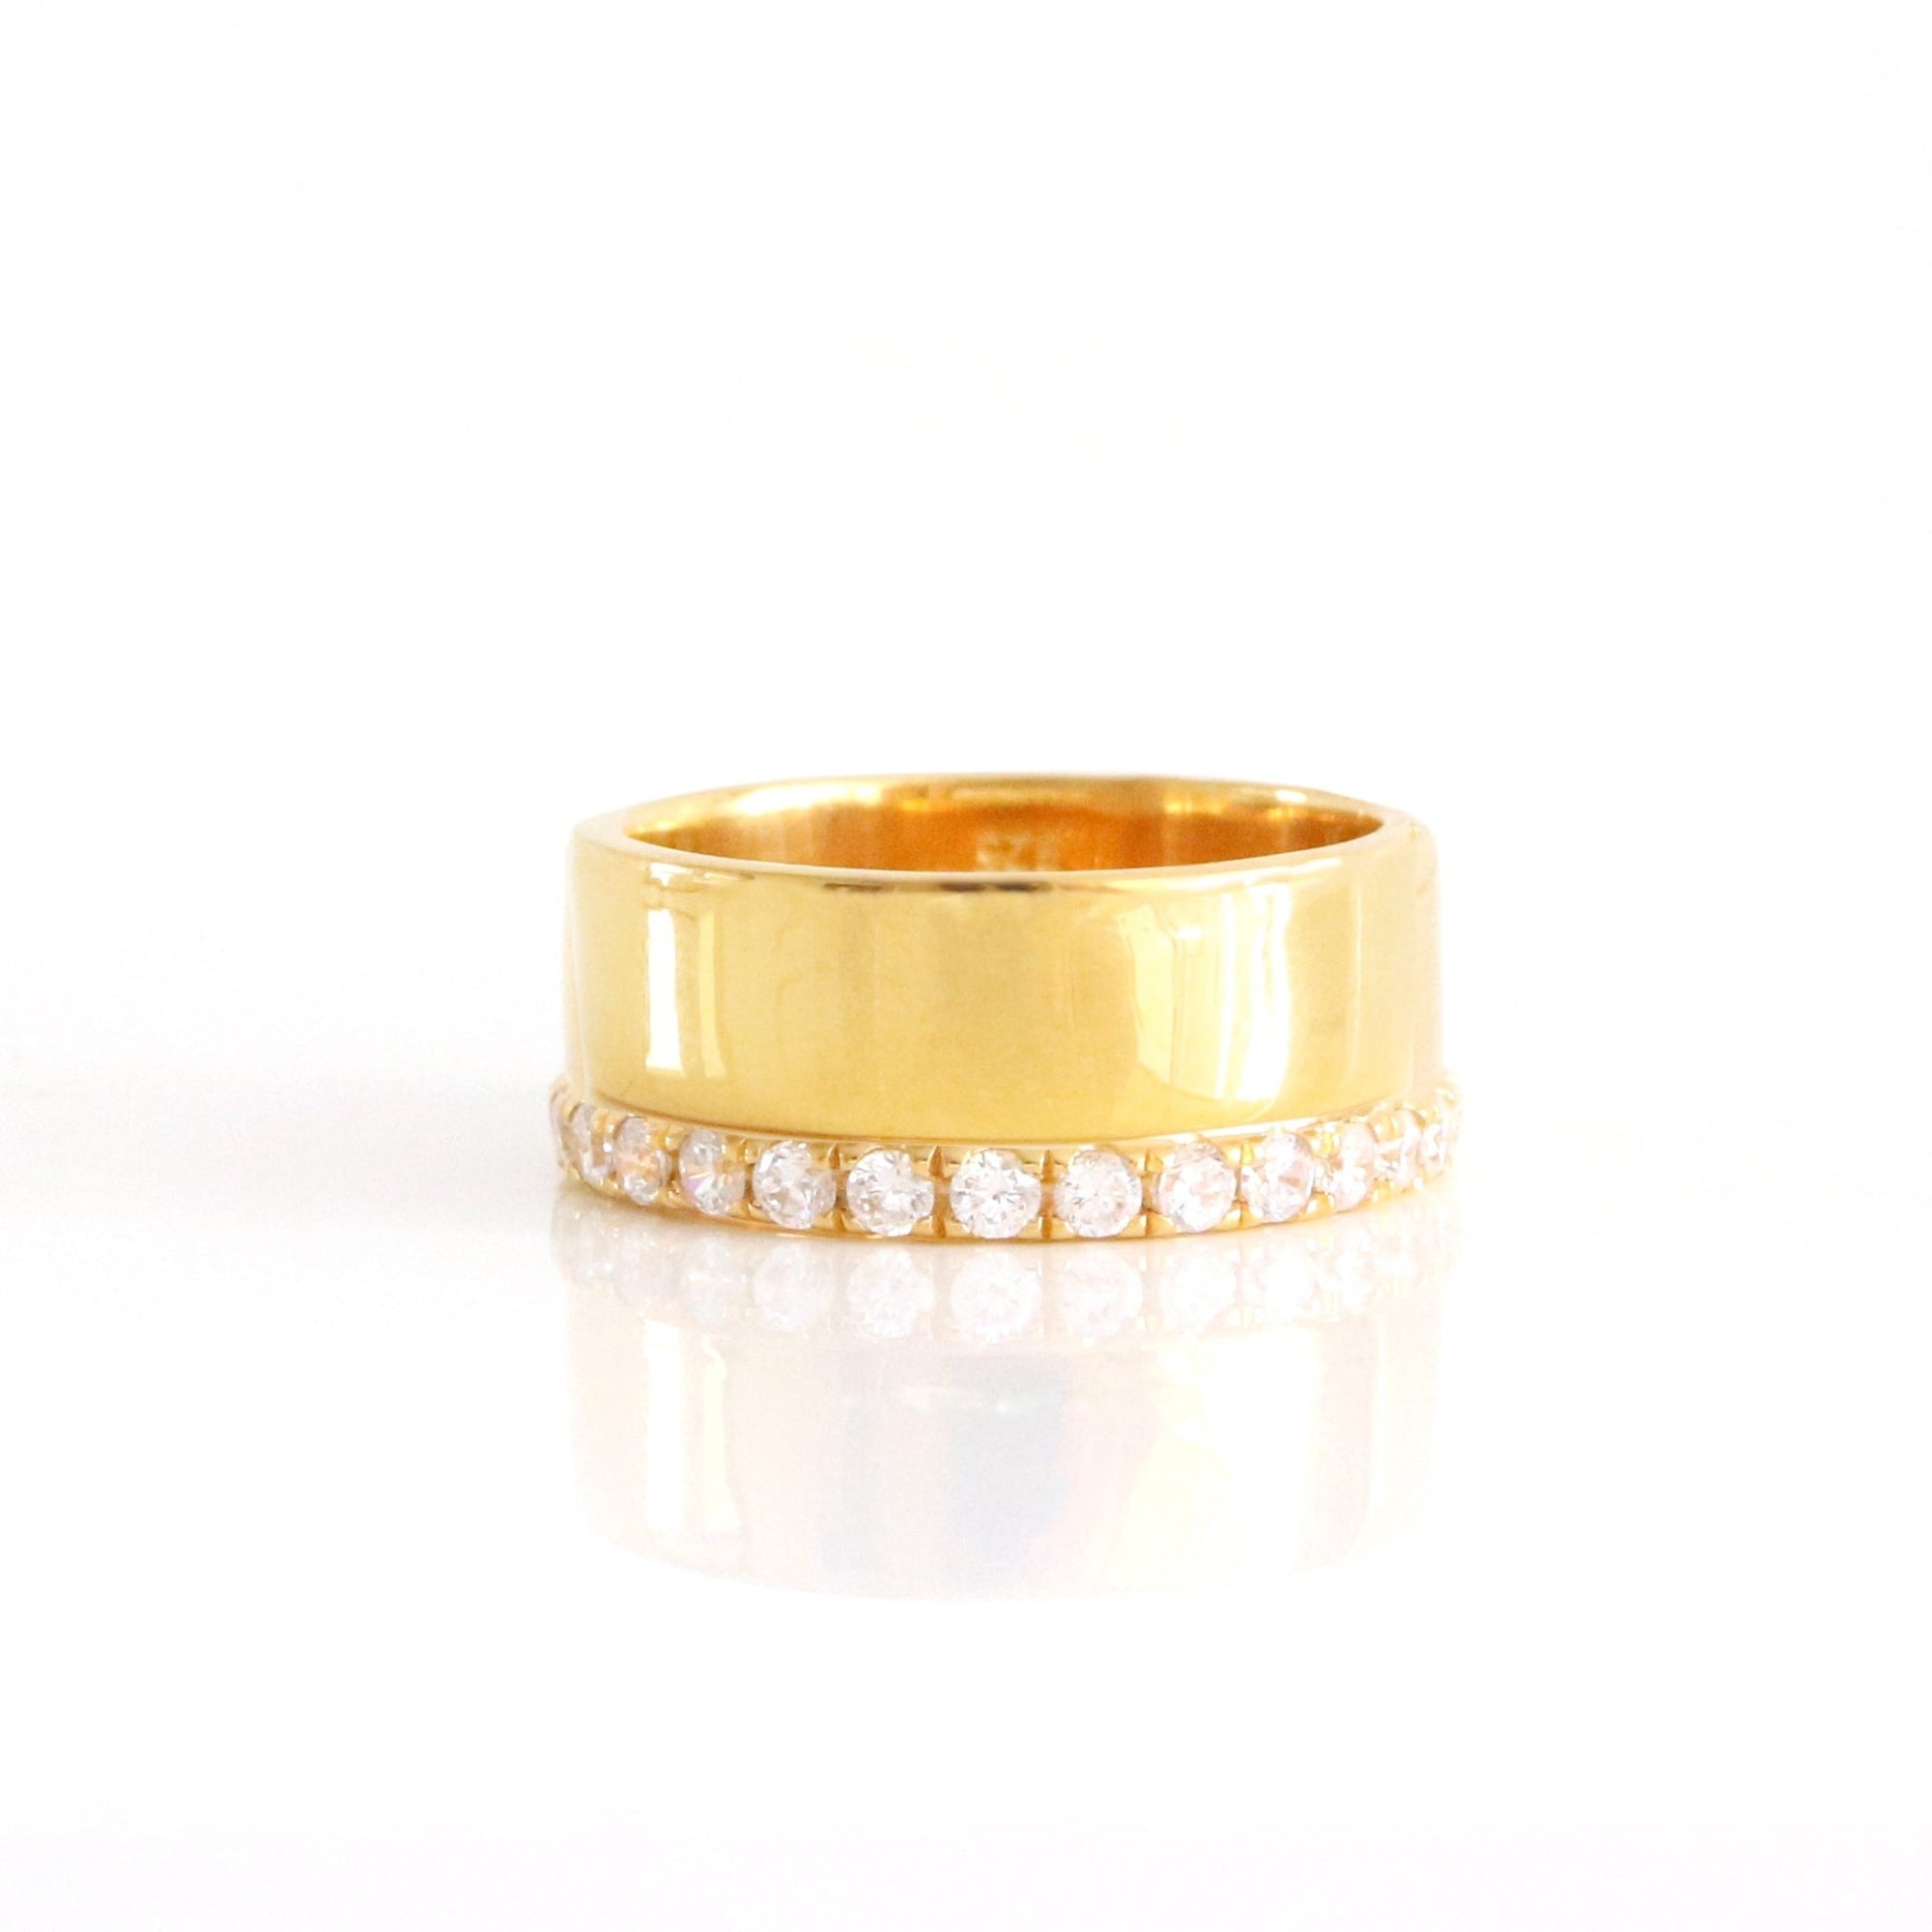 LOVE ETERNITY CIGAR BAND - CUBIC ZIRCONIA & GOLD - SO PRETTY CARA COTTER